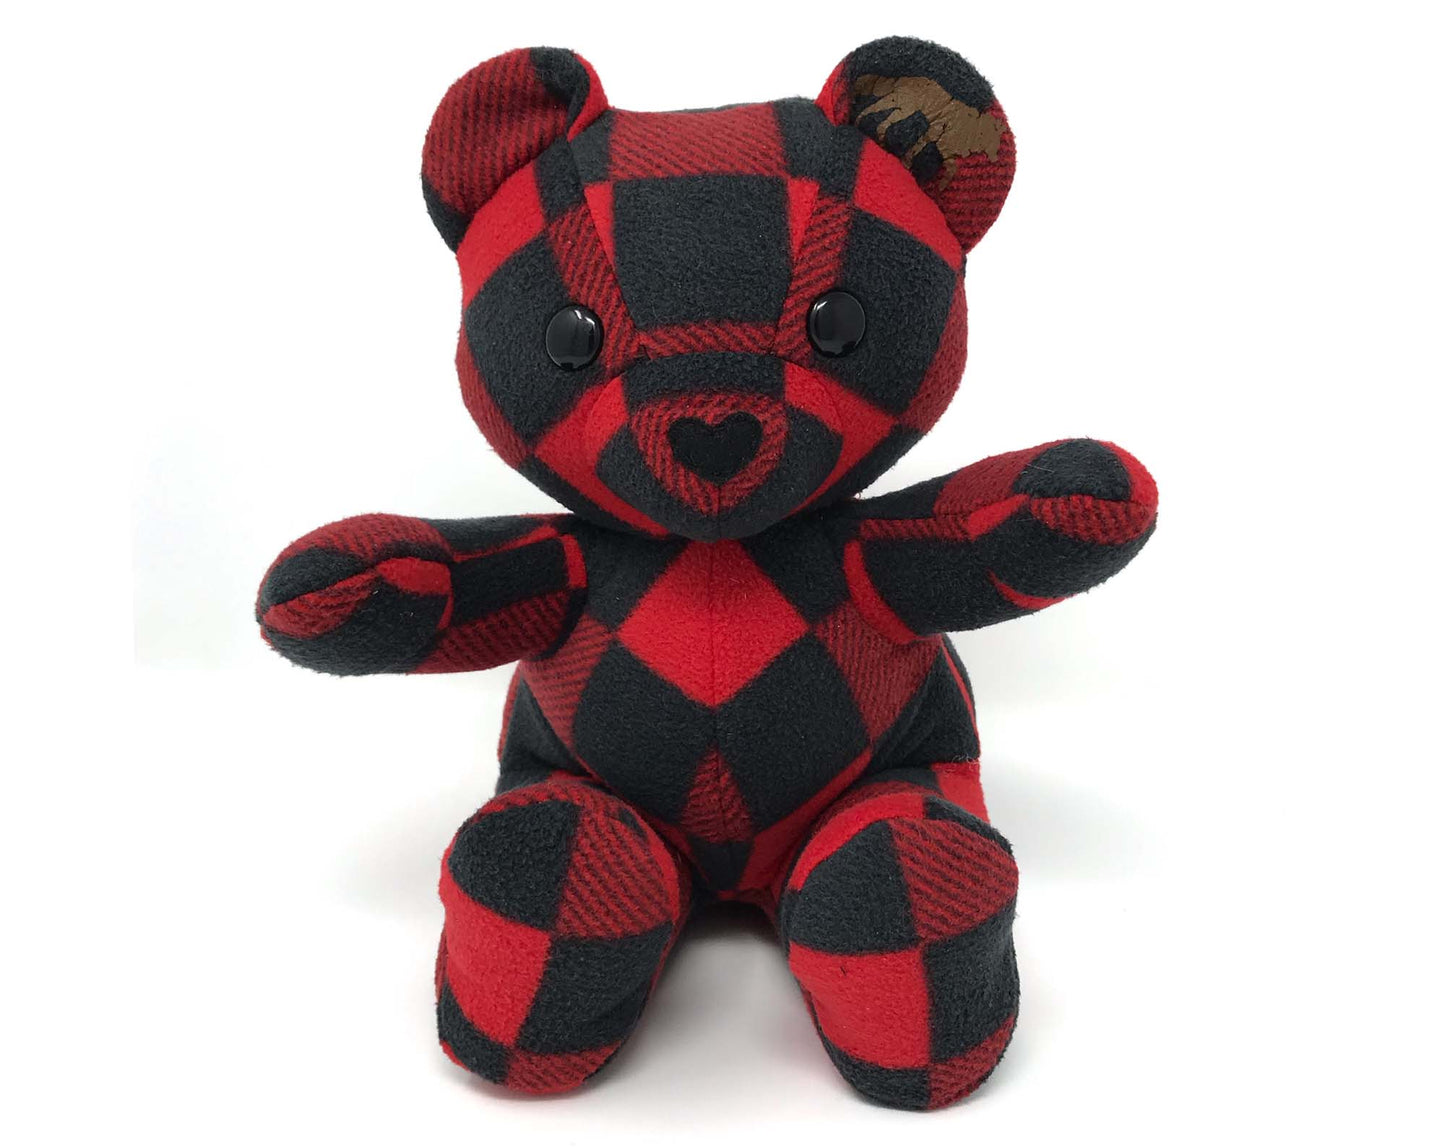 DIGITAL Memory Bear Teddy Sewing Pattern SMALL 8.5” - INSTANT DOWNLOAD